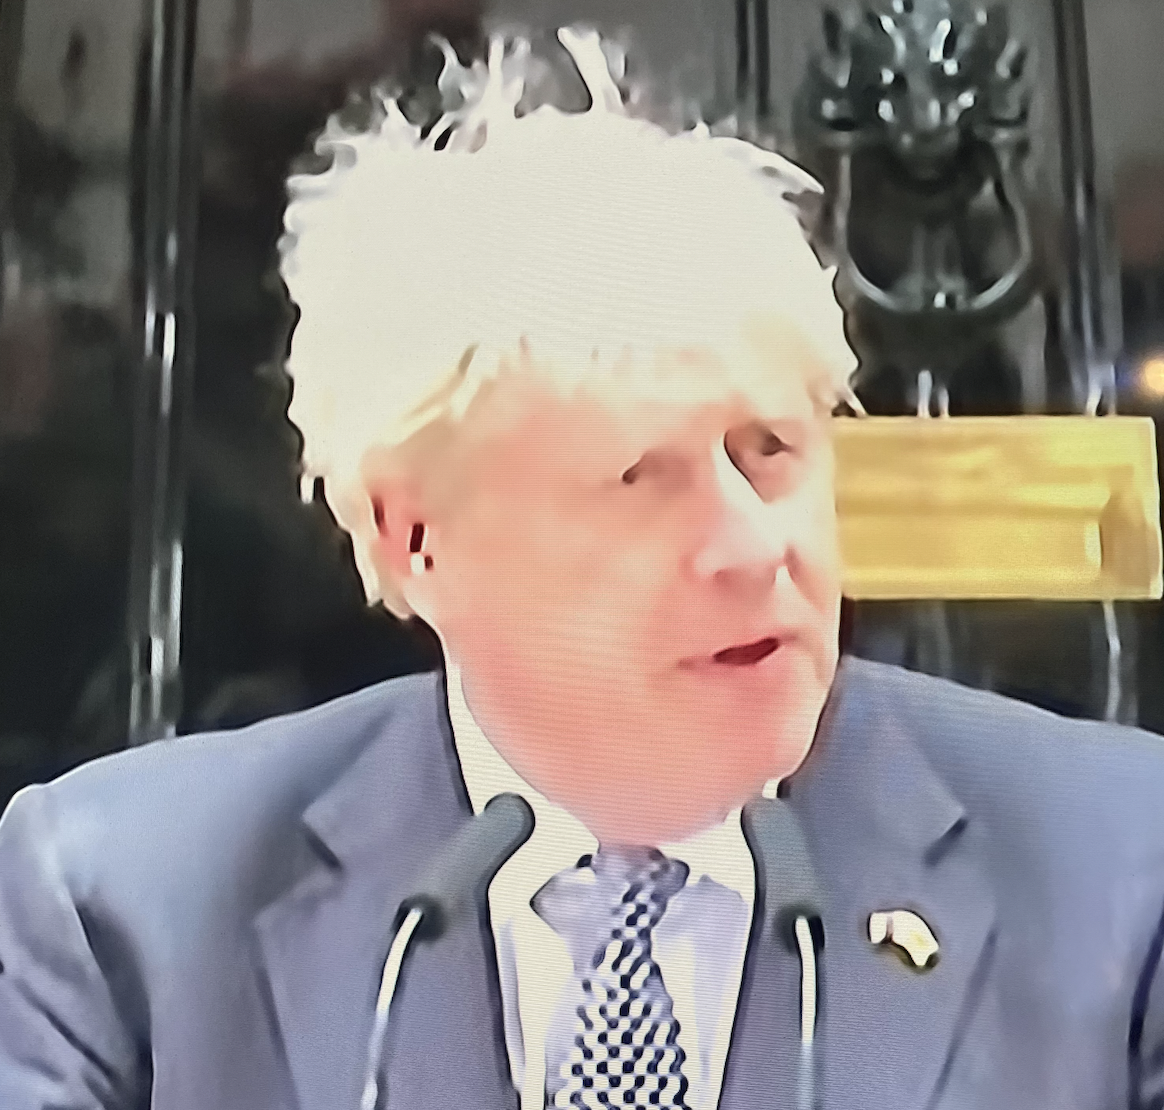 Boris Johnson, resigns as leader of the Conservative Party.